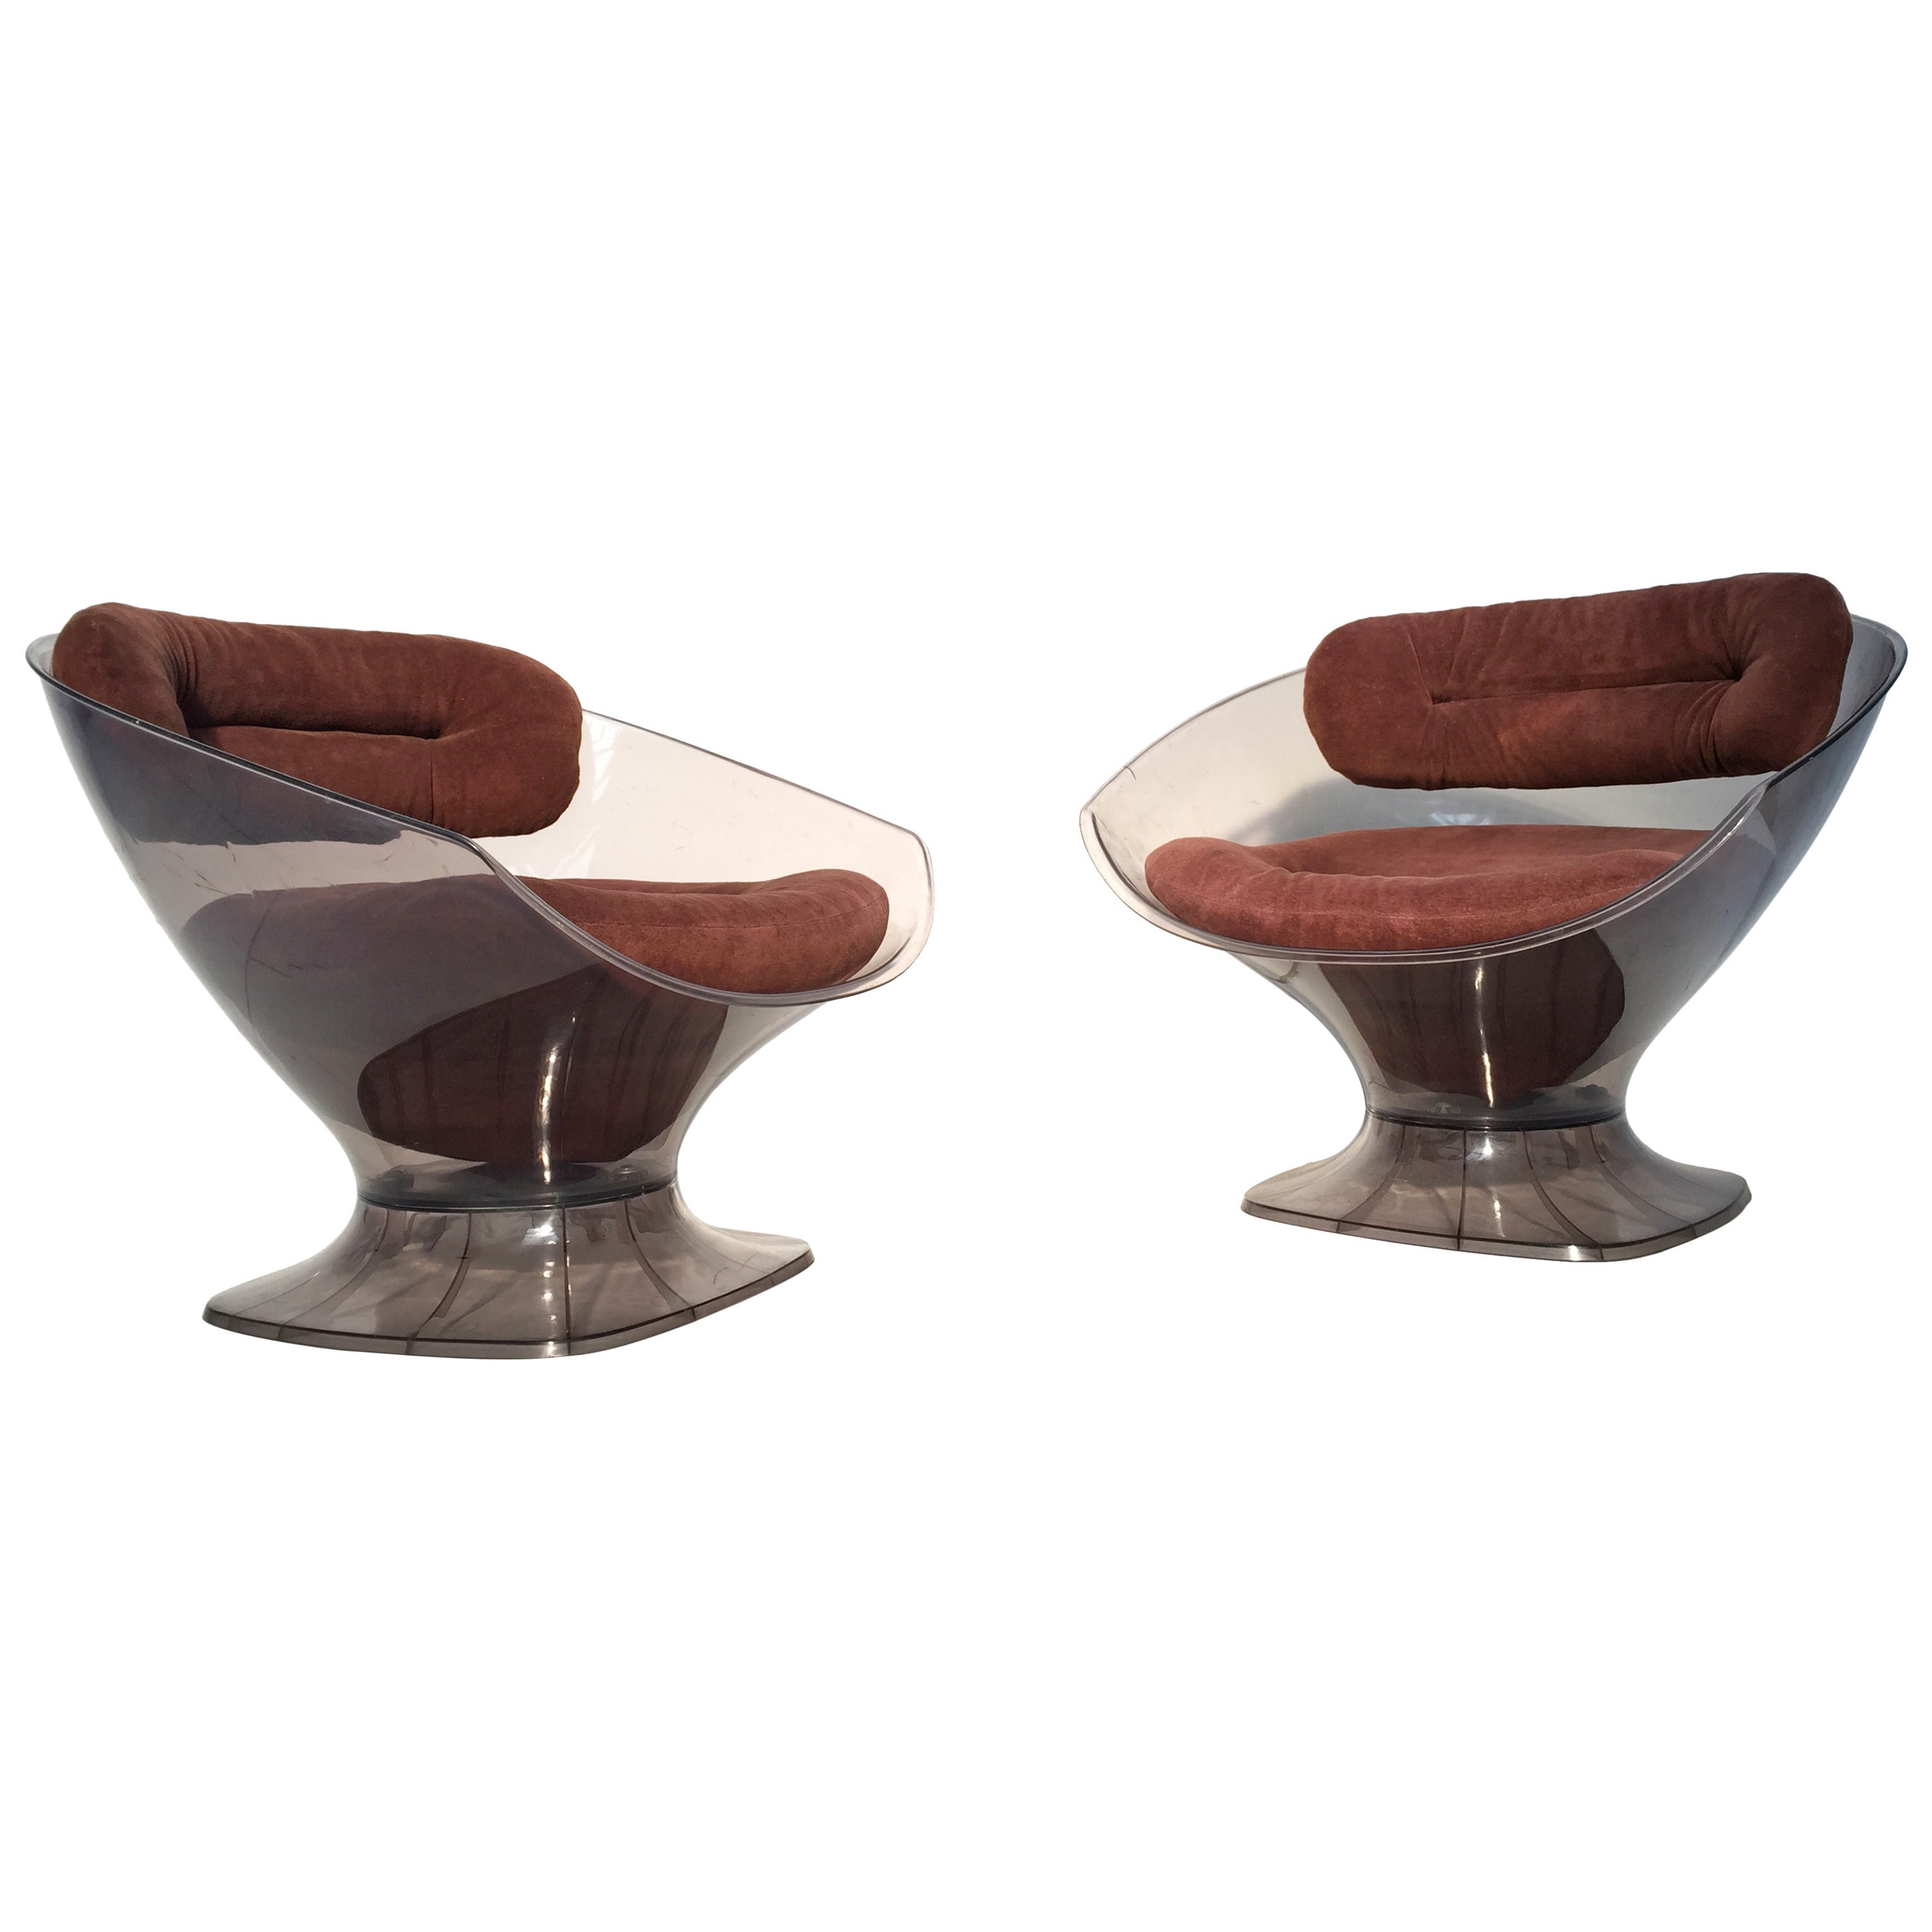 Pair of 1970s Armchairs by French Decorator Raphael, Published